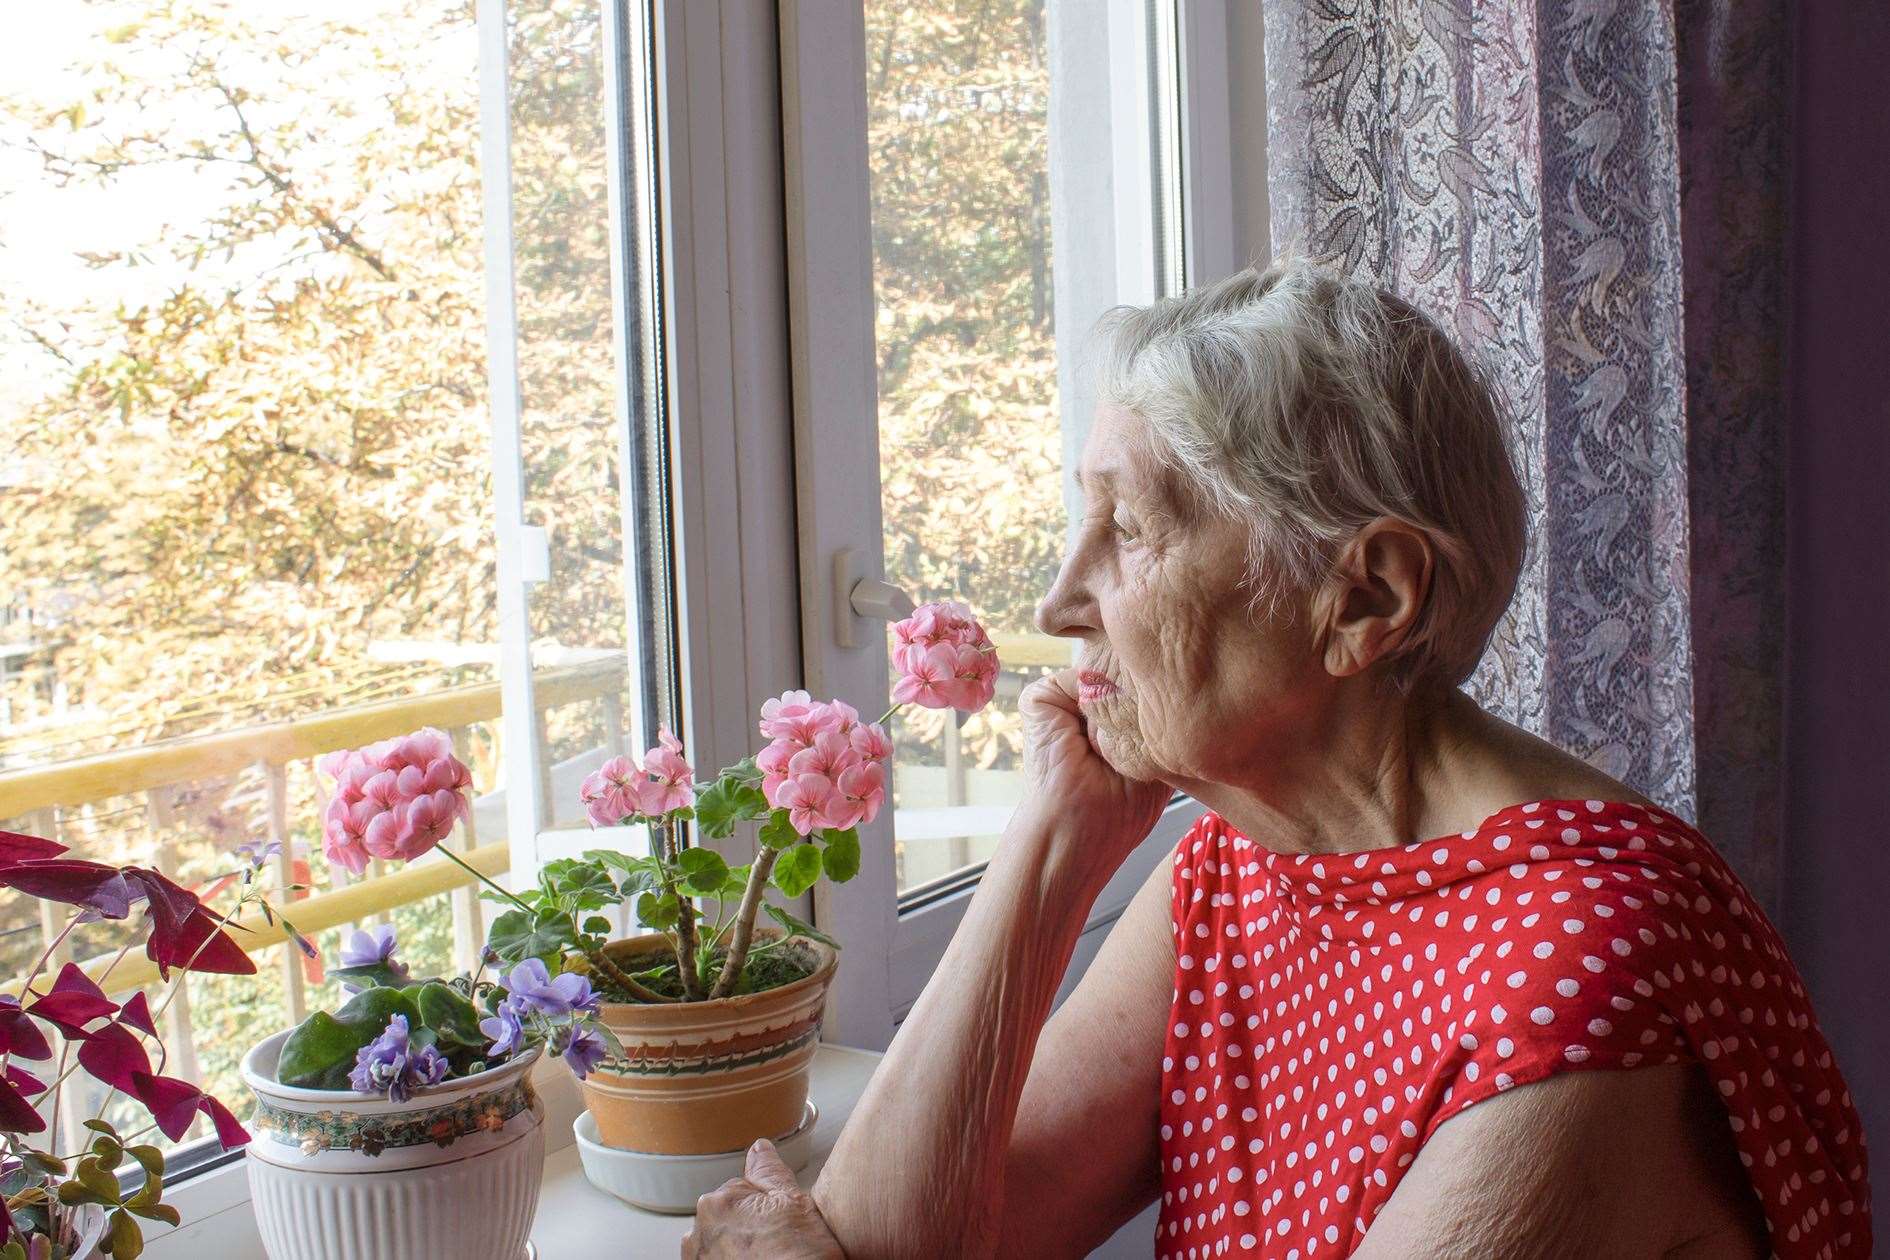 Older people can often feel isolated, trapped in homes no longer suitable for them and remote from any sense of community.